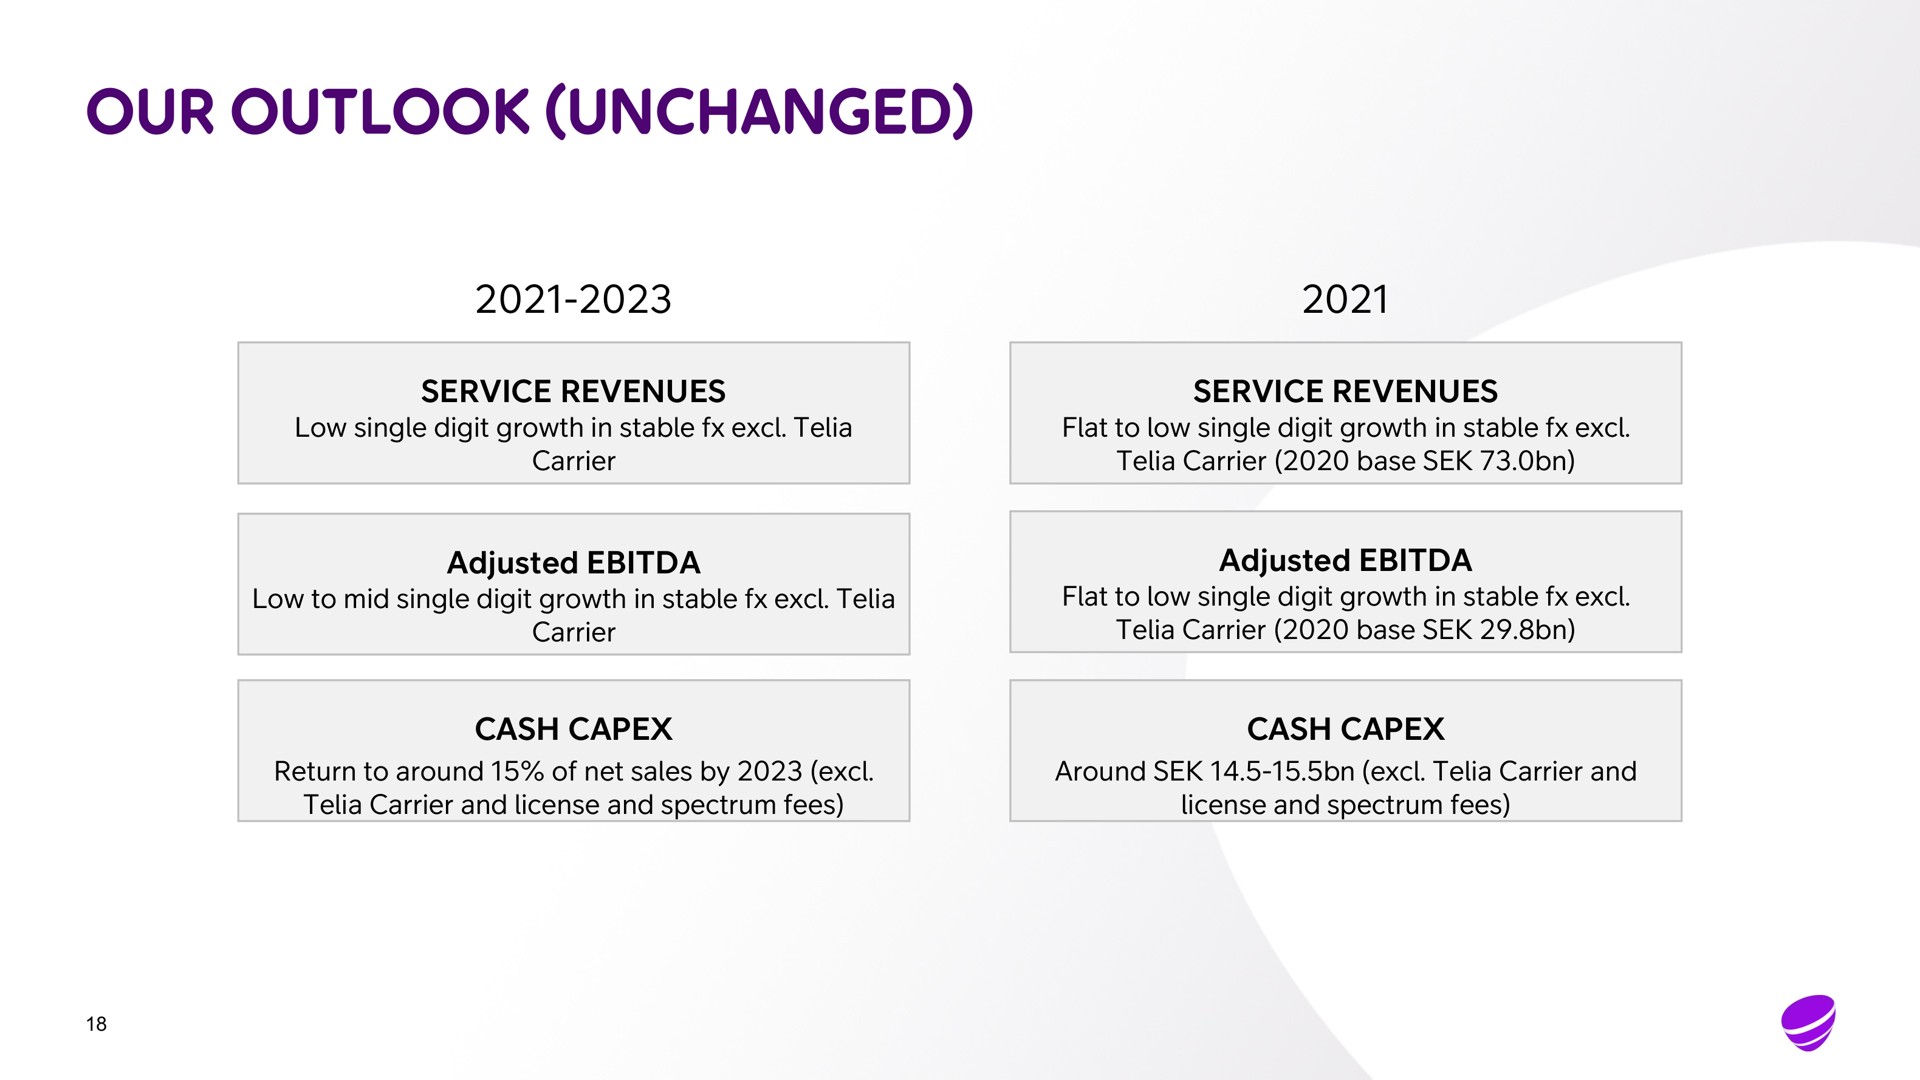 our outlook unchanged service revenues low single digit growth in stable carrier service revenues flat to low single digit growth in stable carrier base adjusted low to mid single digit growth in stable carrier adjusted flat to low single digit growth in stable carrier base cash return to around of net sales by carrier and license and spectrum fees cash around carrier and license and spectrum fees | Telia Company